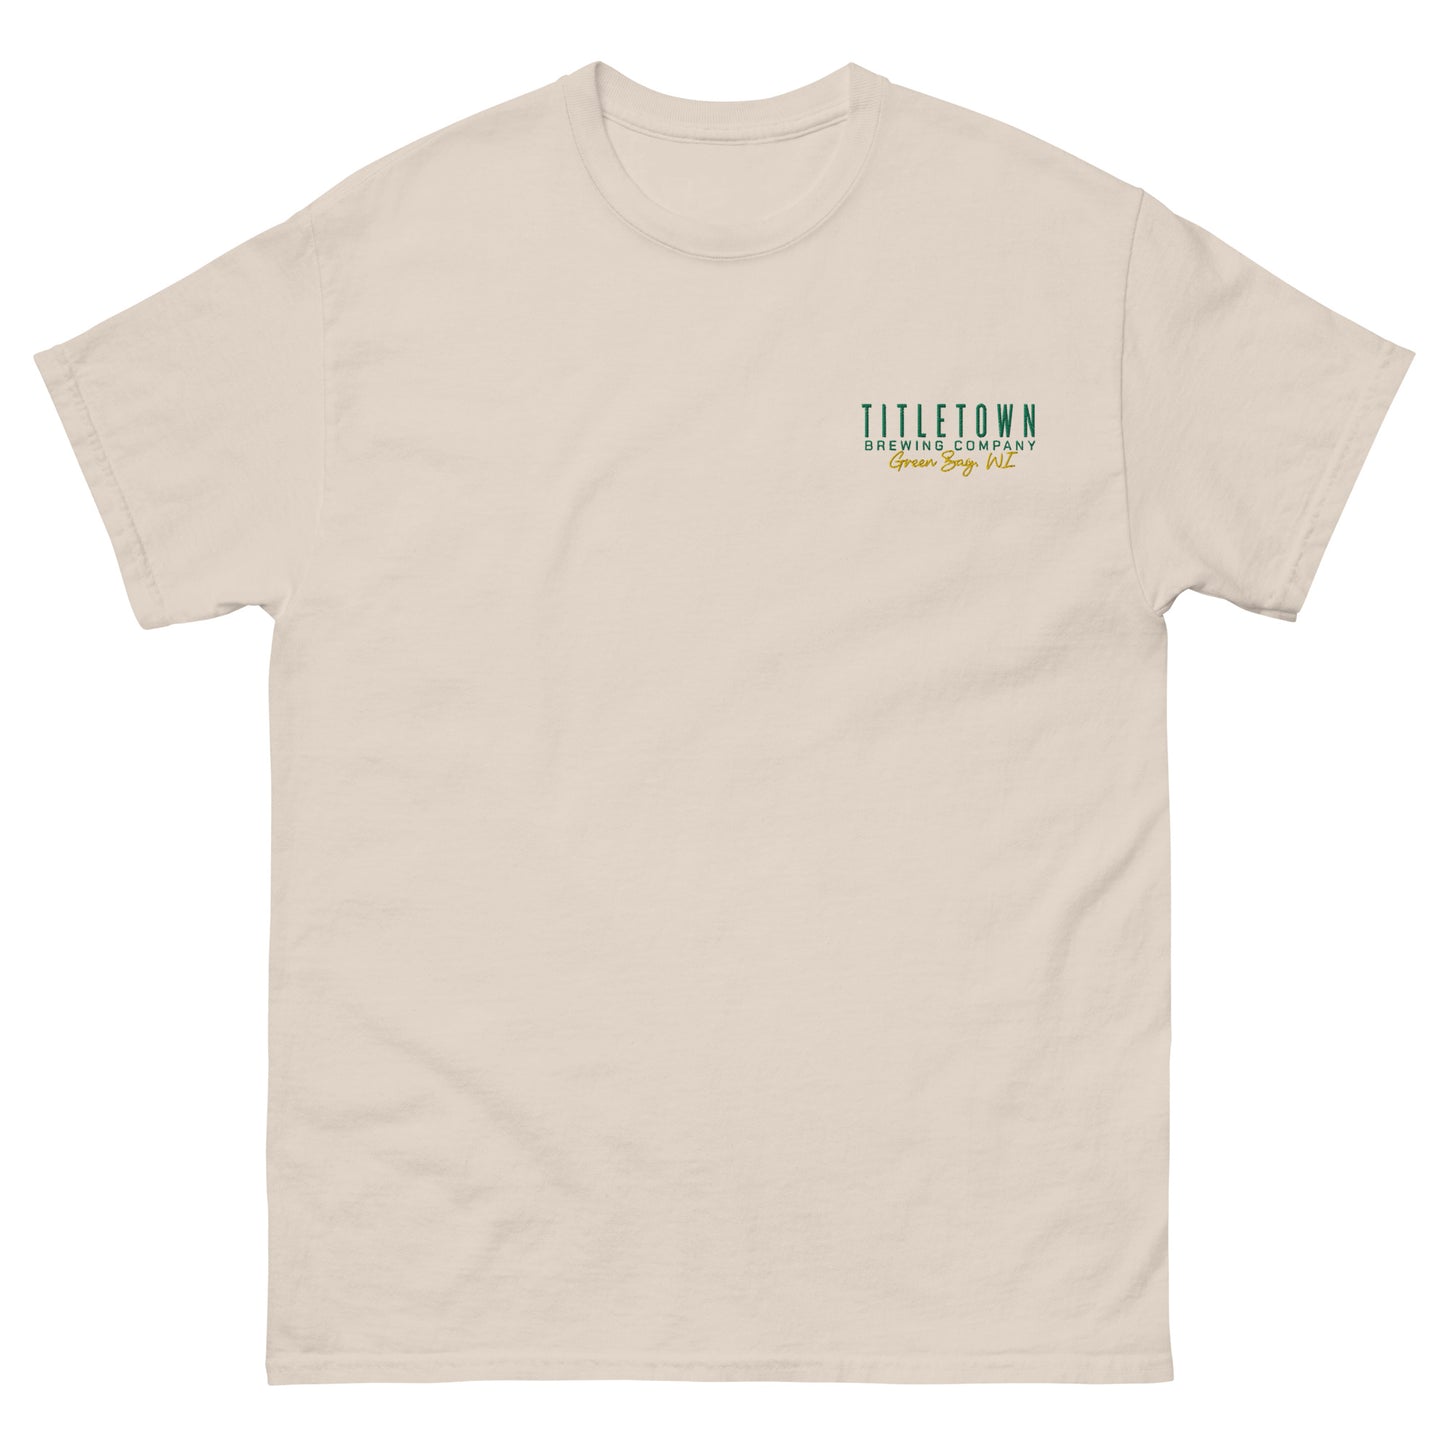 Titletown Brewing Company Men's classic tee